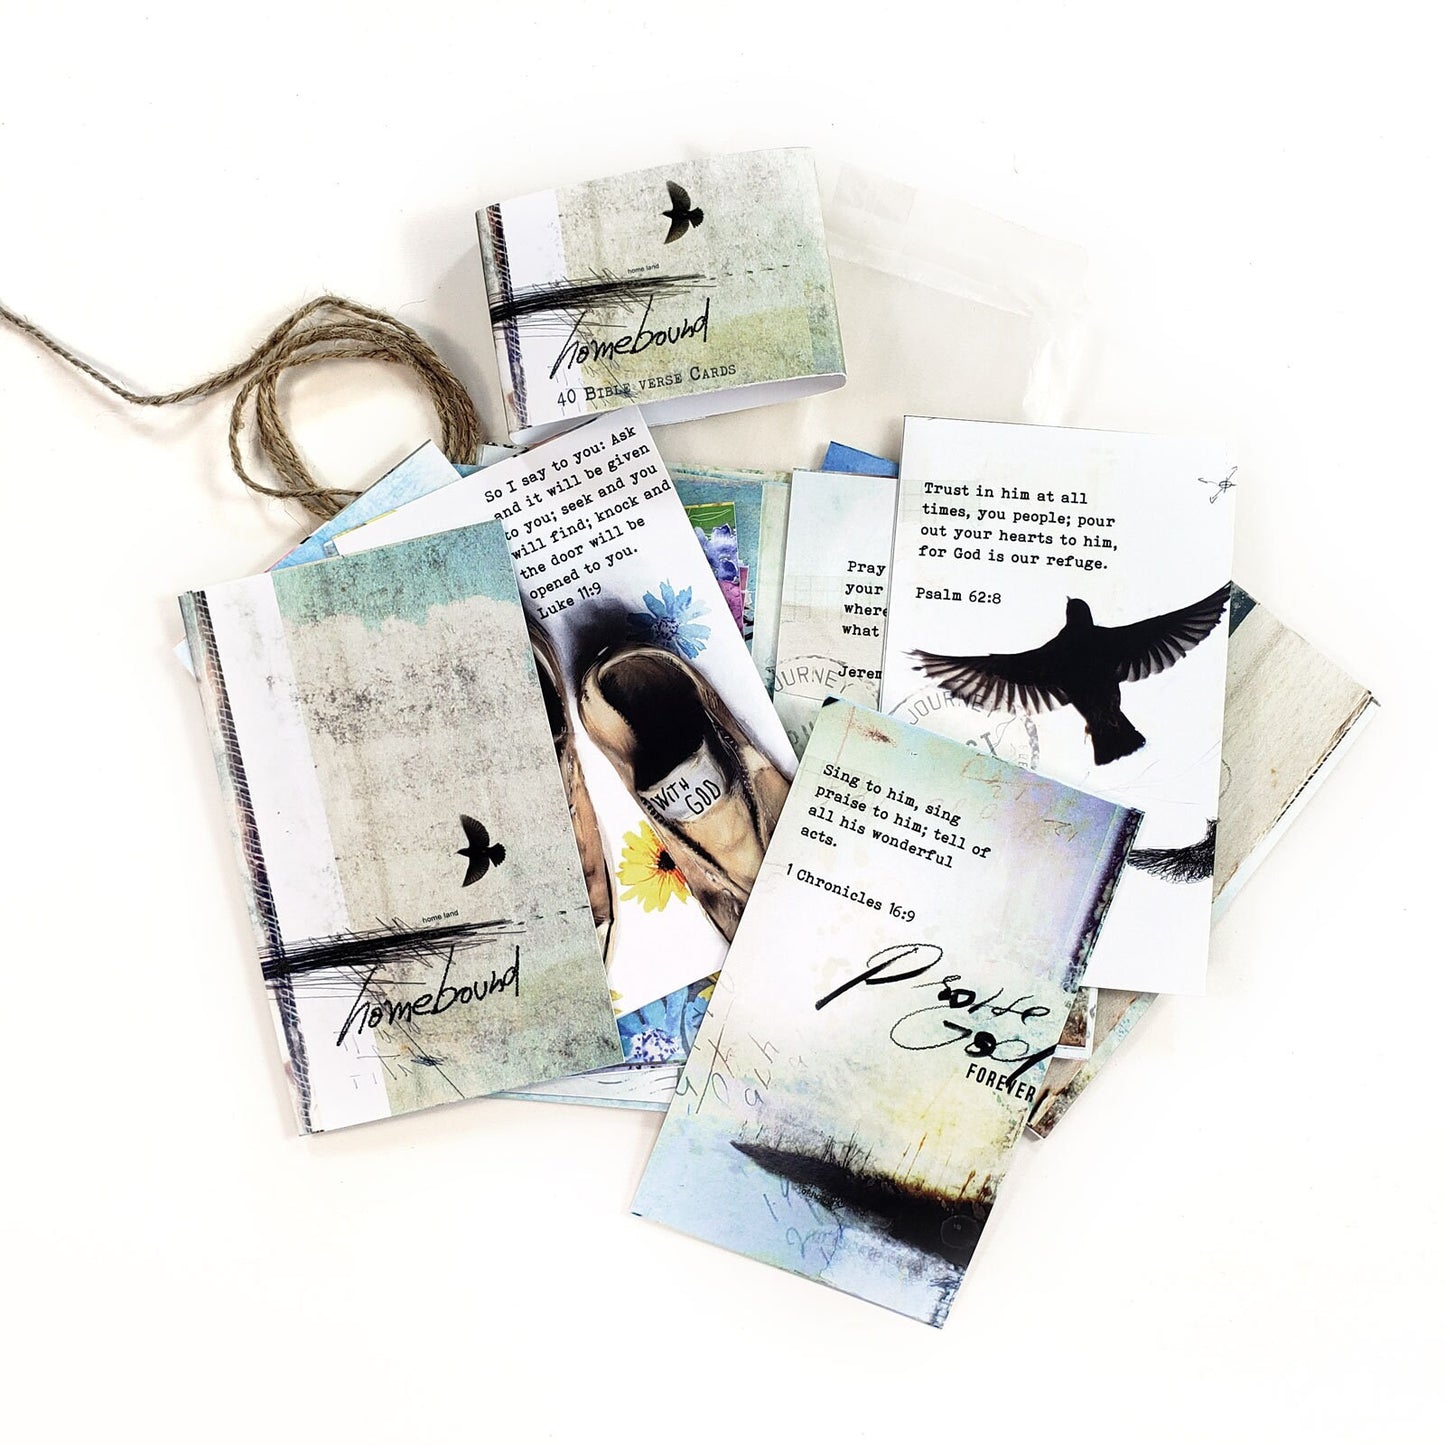 Homebound - set of 40 Bible verse cards